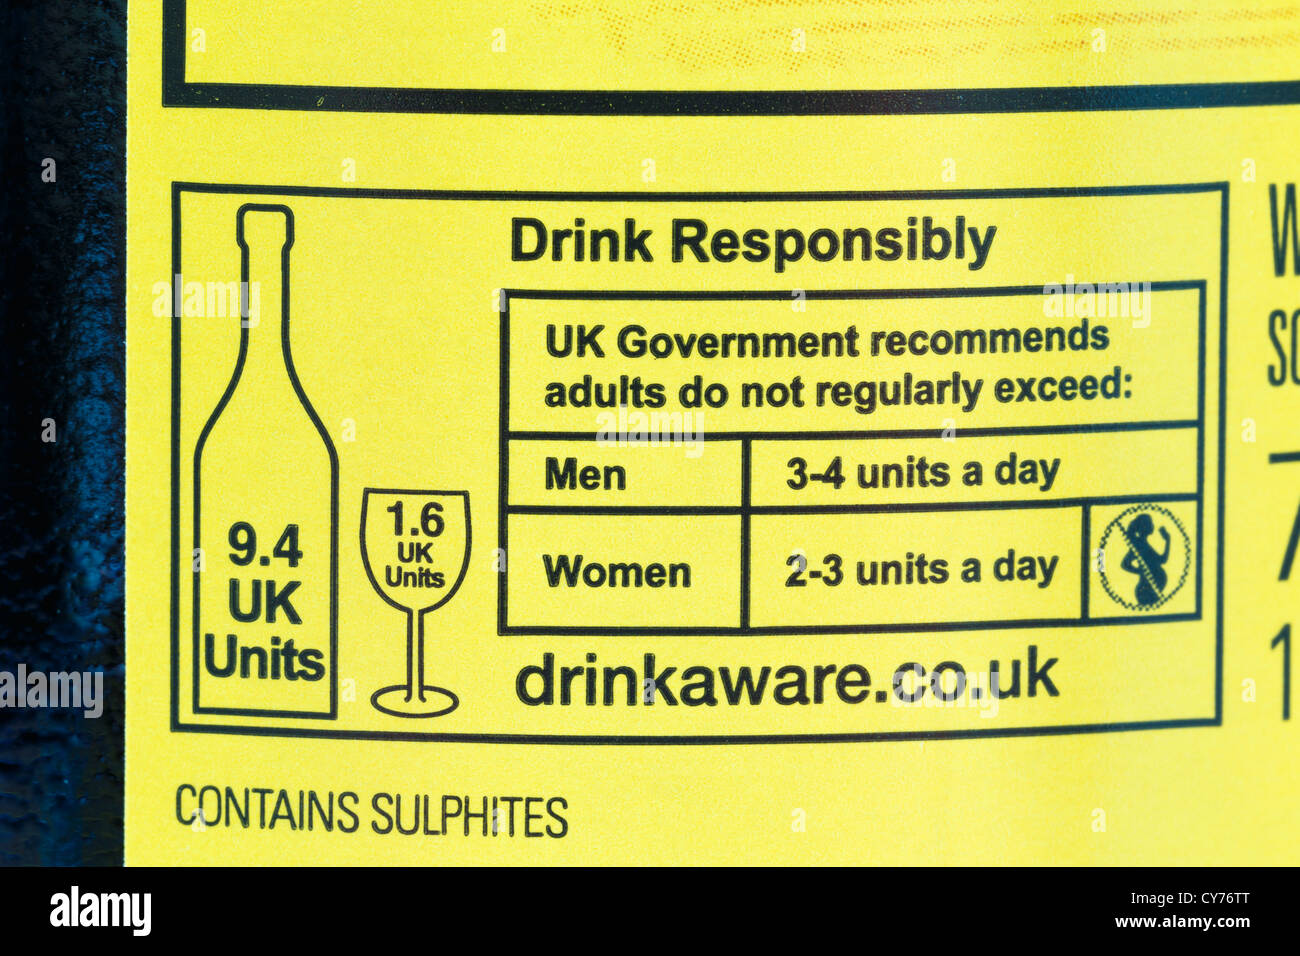 Safe drinking advice label showing alcohol units recommended by the UK government on a bottle of red wine. Stock Photo